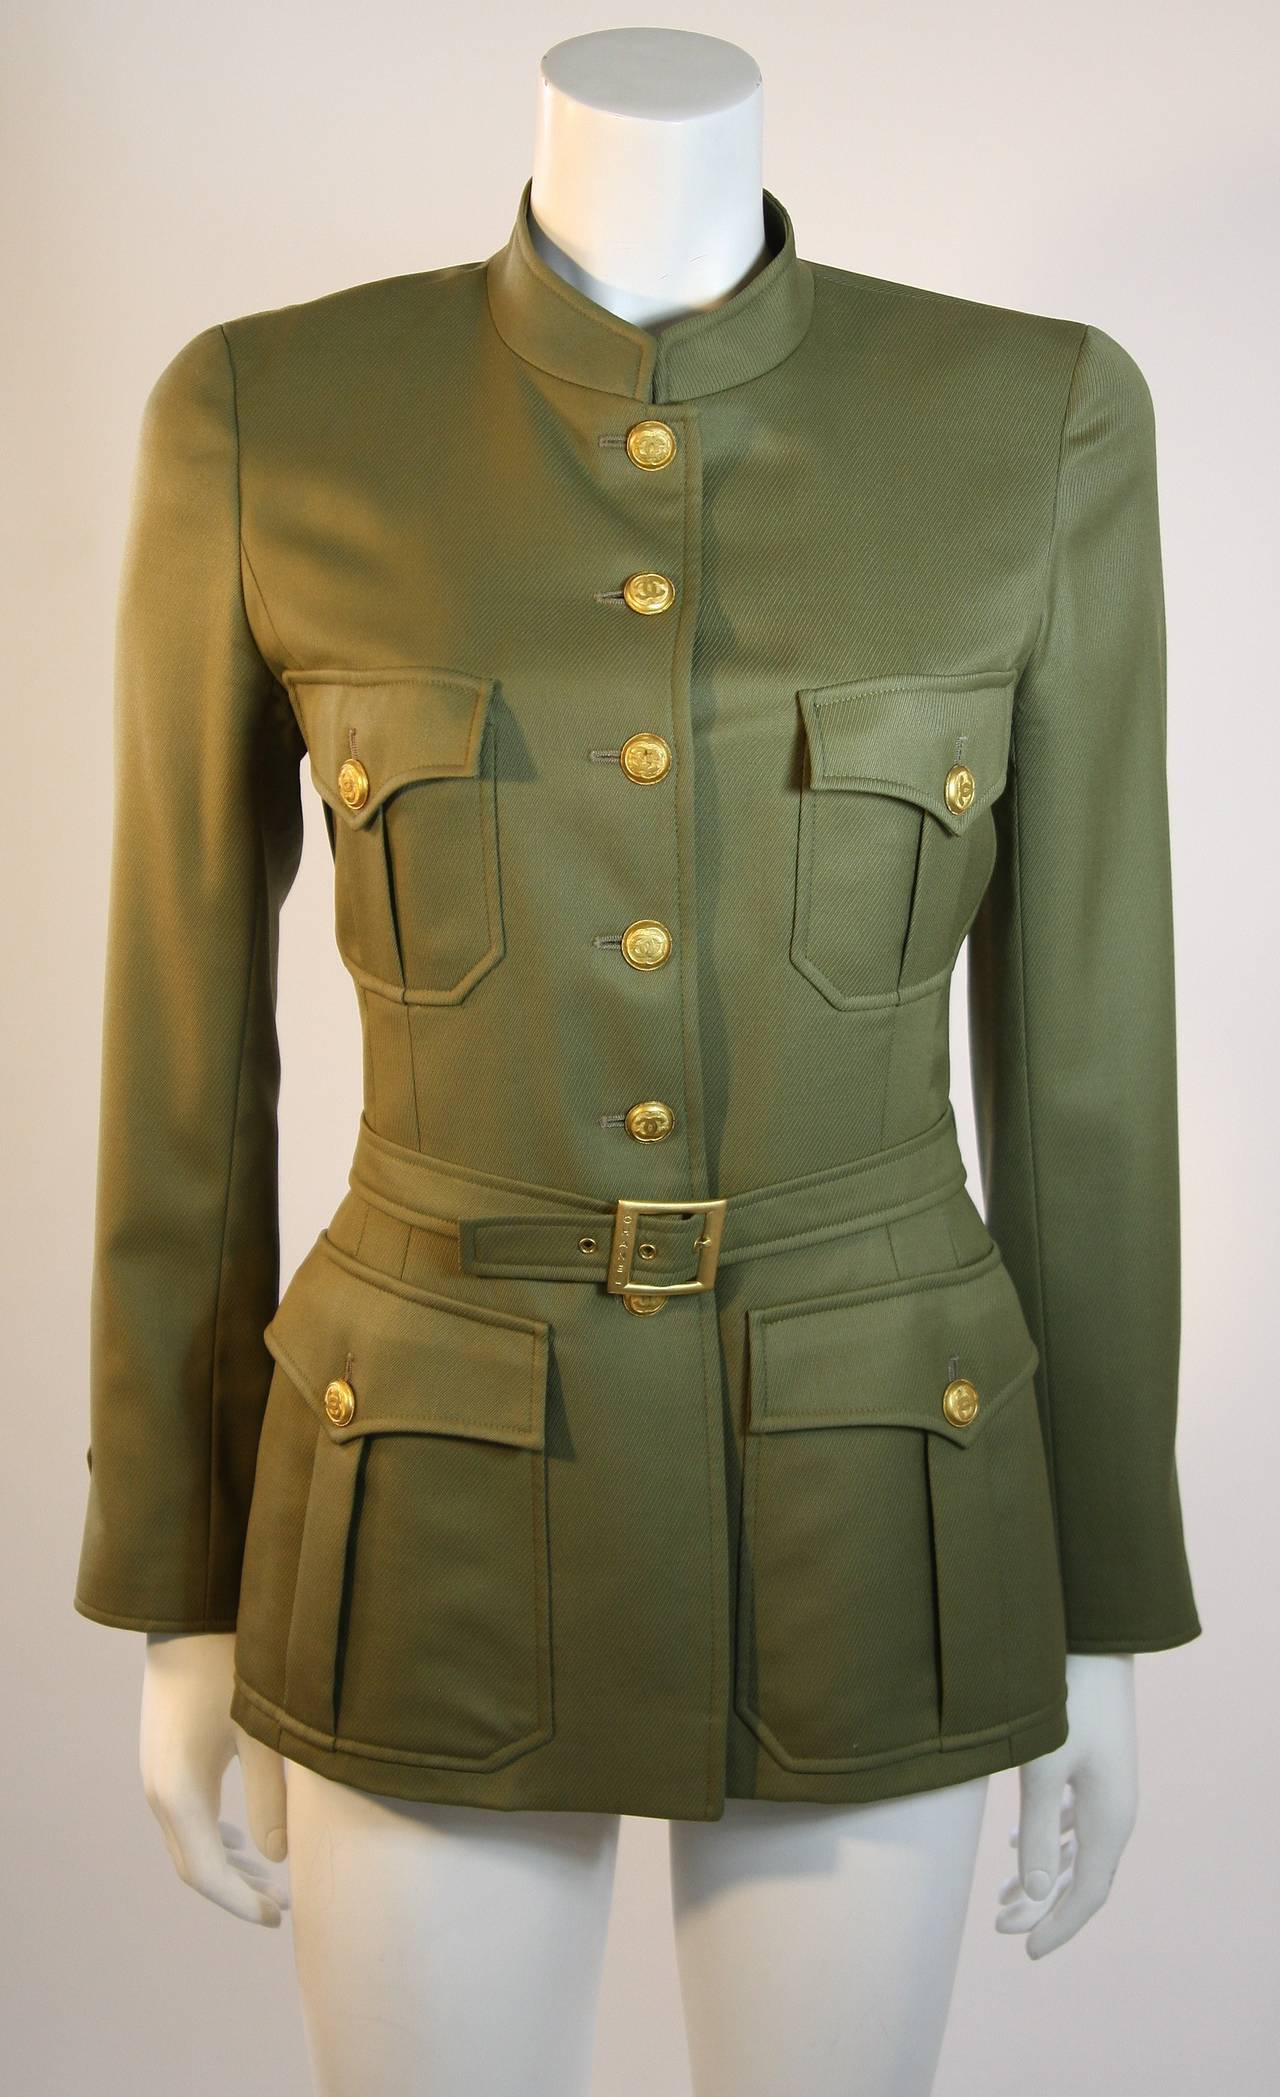 Chanel 96A Military Inspired Army Green Light Wool Jacket & Pants Suit with Belt 1